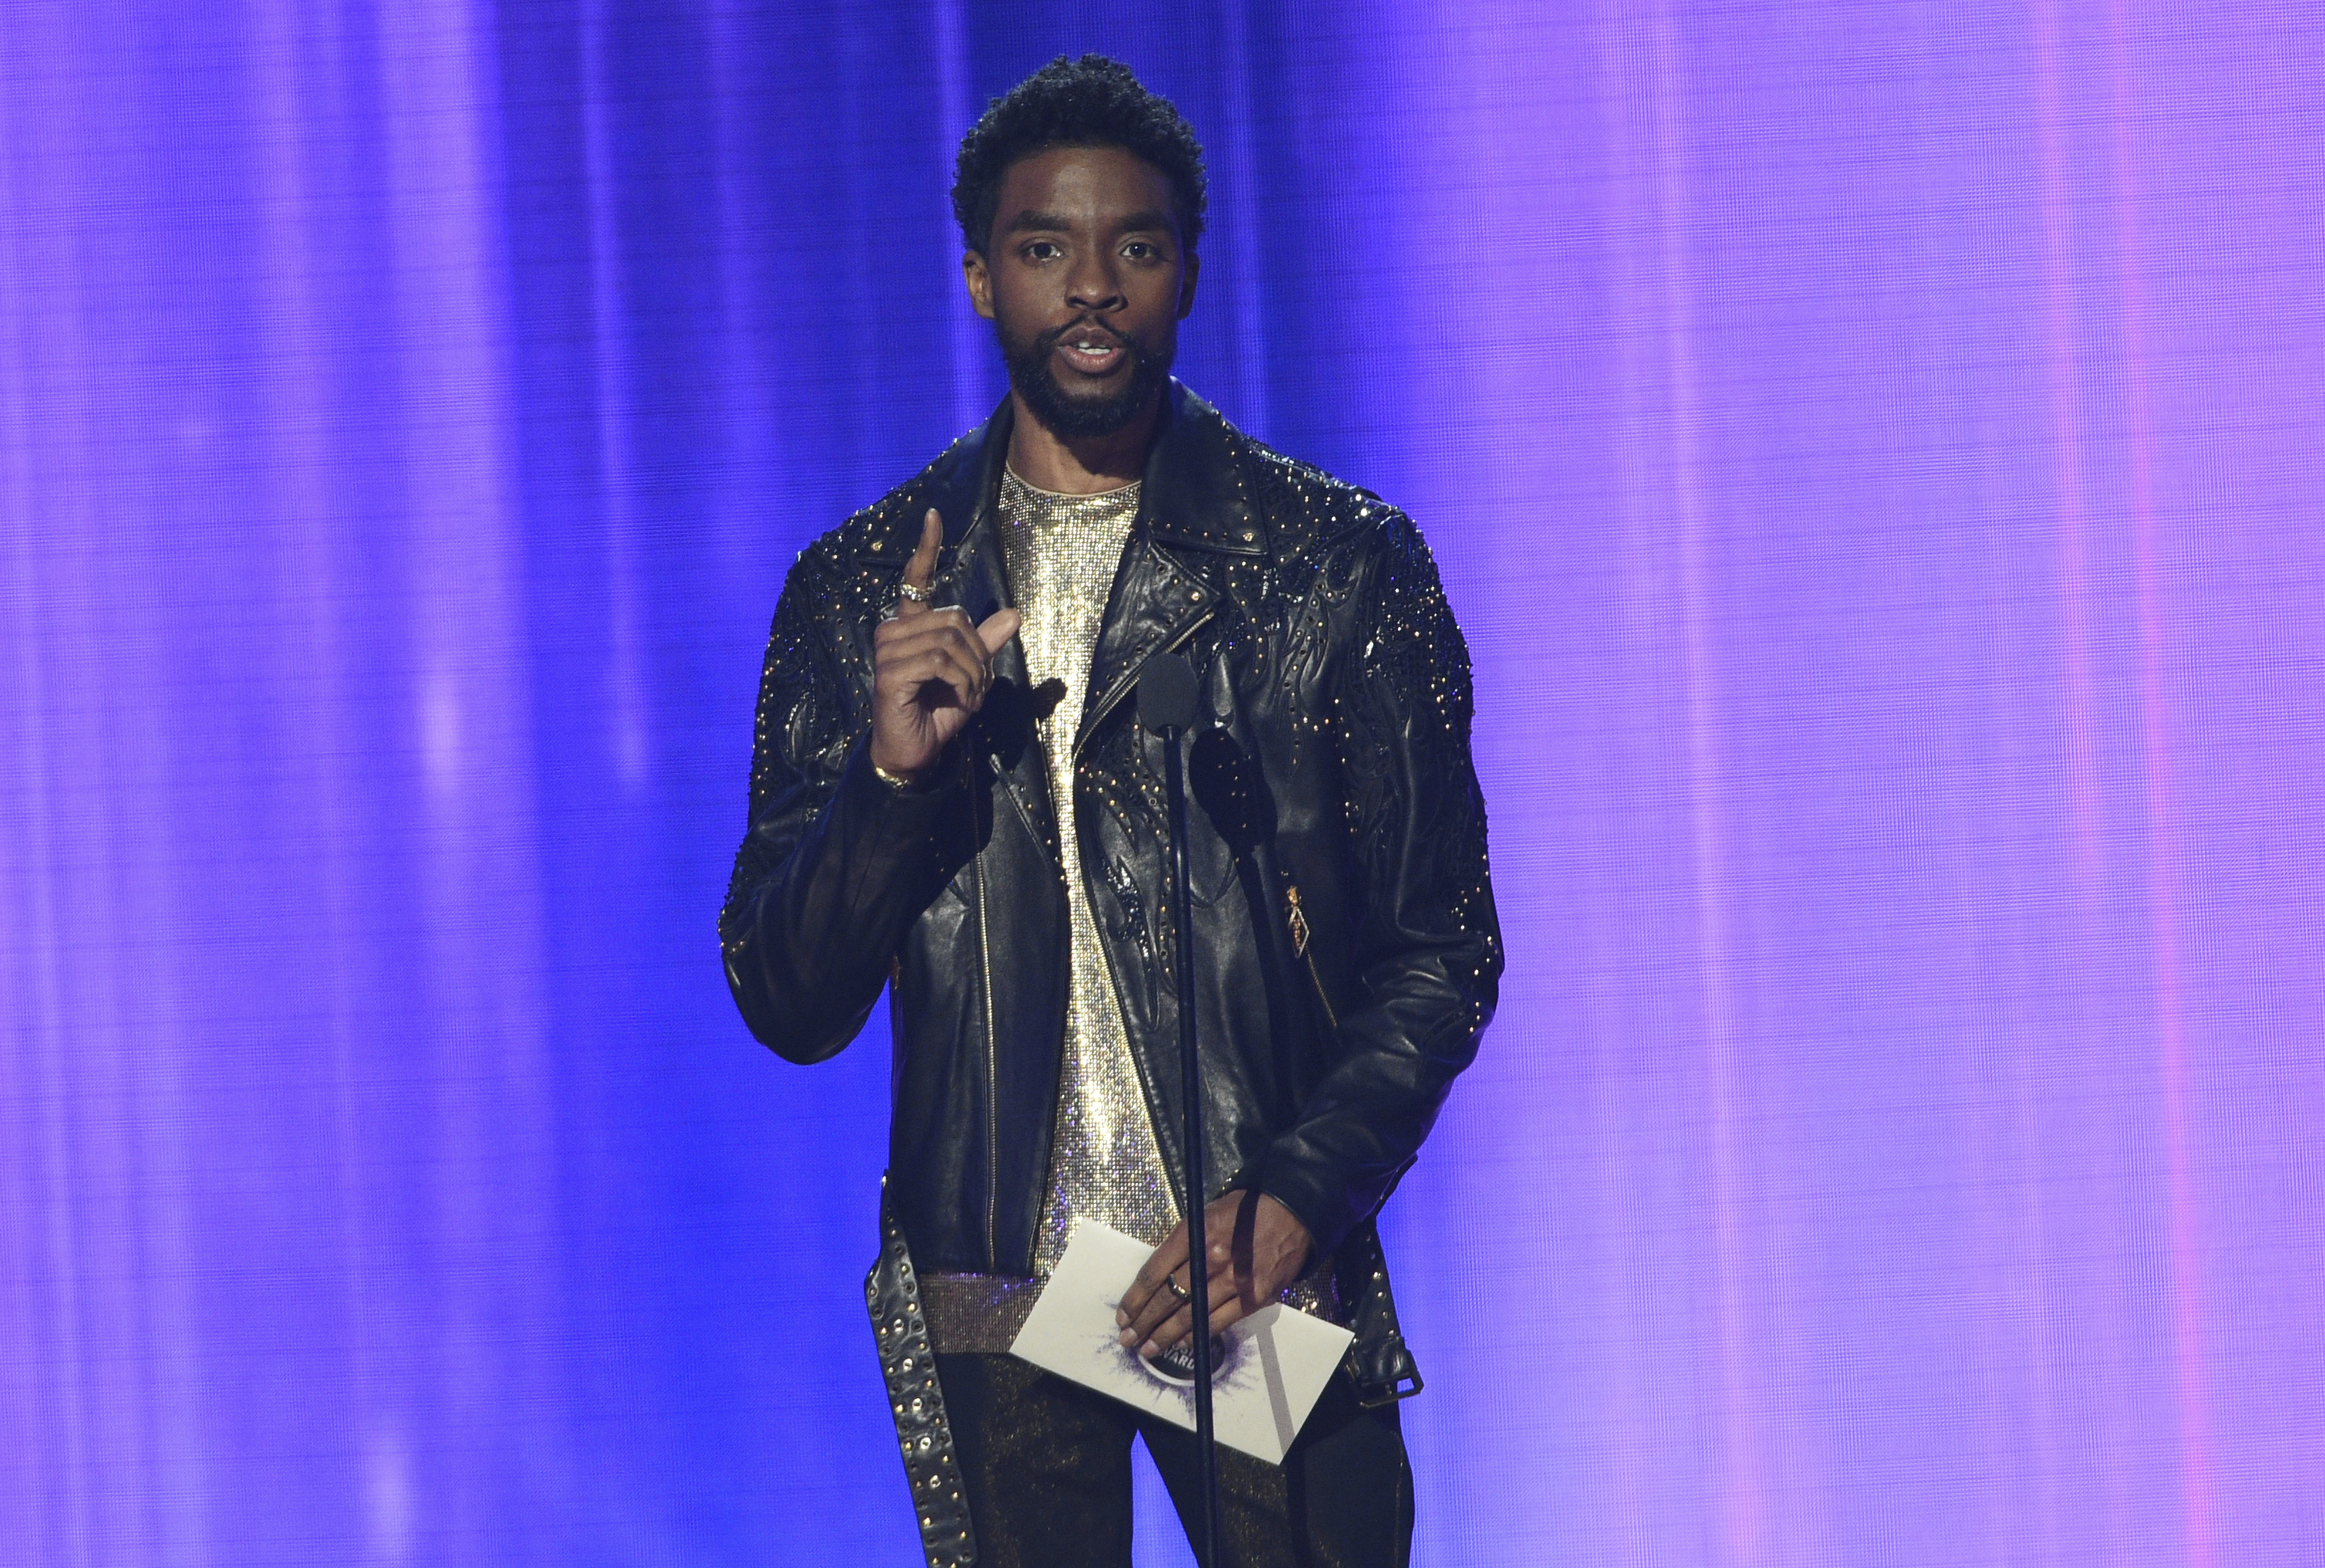 Chadwick Boseman presents the award for favorite alternative rock artist at the American Music Awards on Sunday, Nov. 24, 2019, at the Microsoft Theater in Los Angeles. (Photo by Chris Pizzello/Invision/AP)